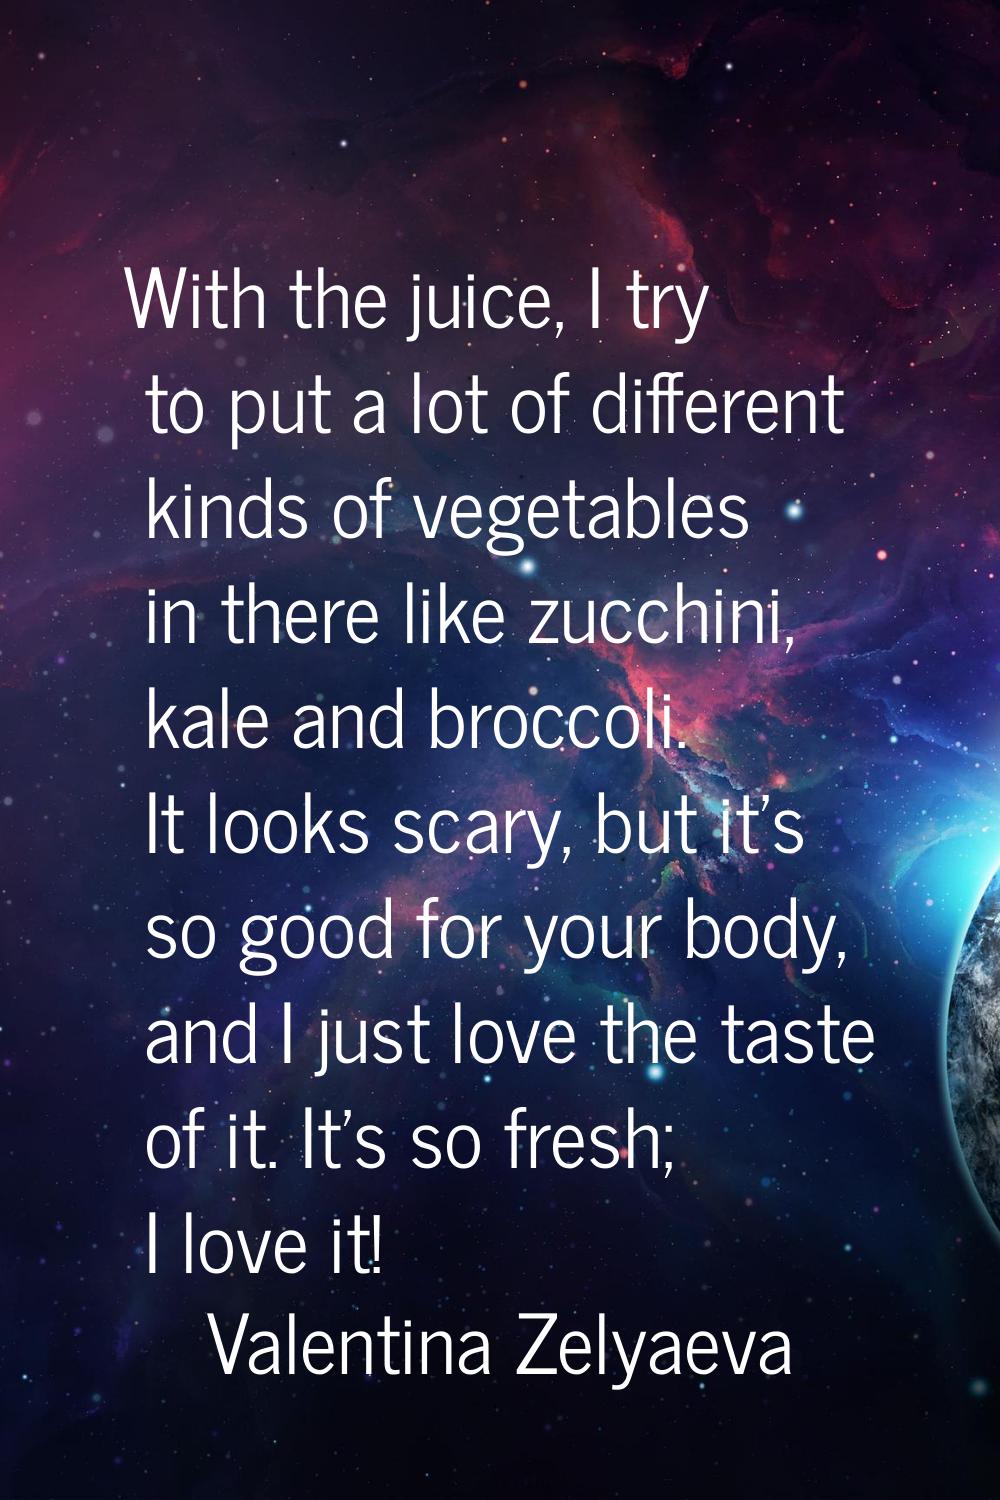 With the juice, I try to put a lot of different kinds of vegetables in there like zucchini, kale an